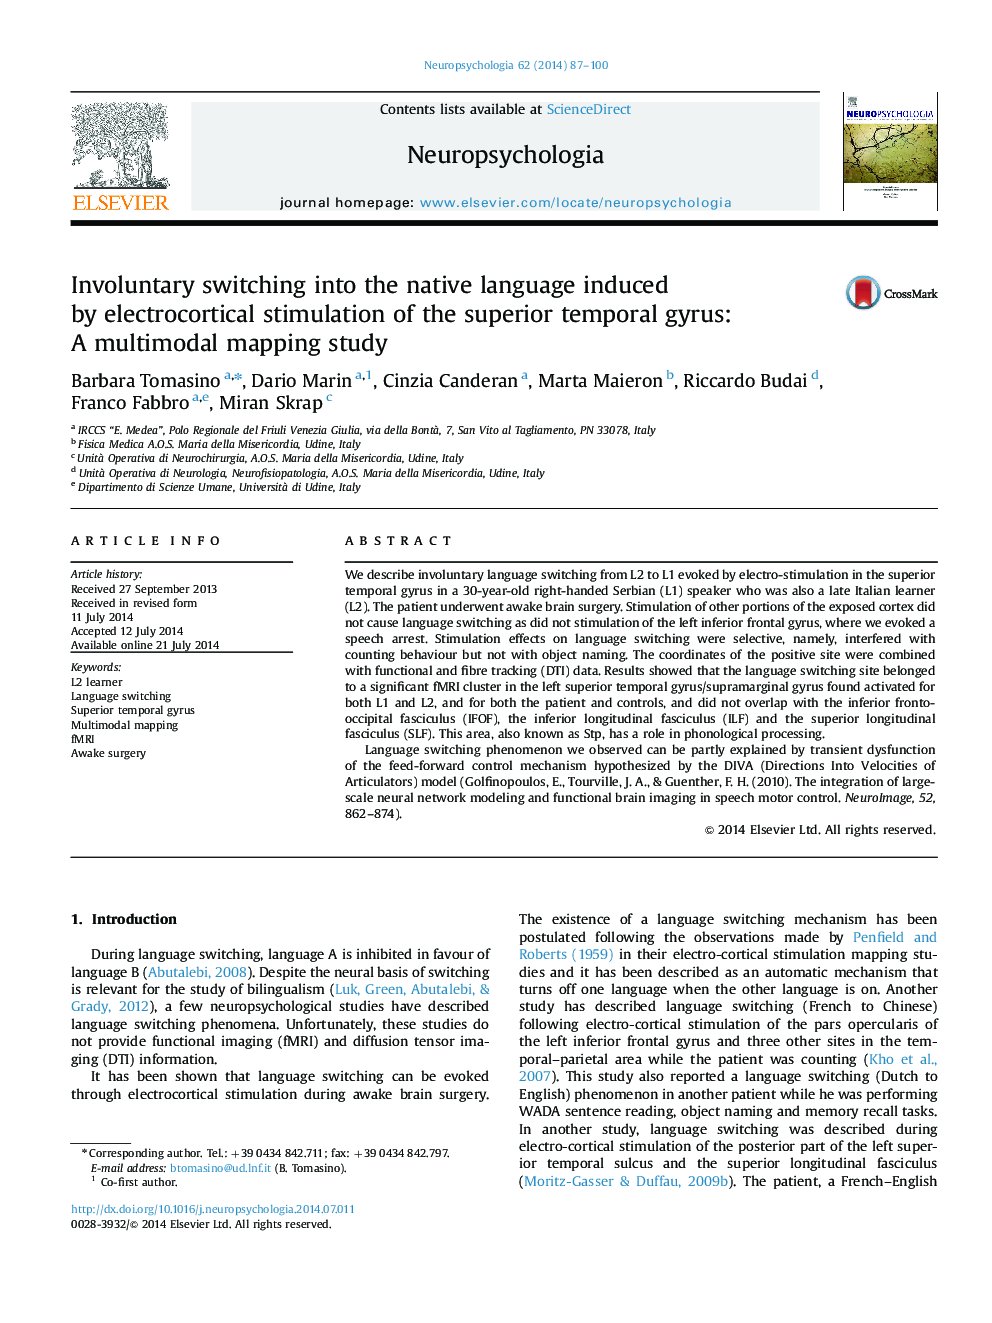 Involuntary switching into the native language induced by electrocortical stimulation of the superior temporal gyrus: A multimodal mapping study